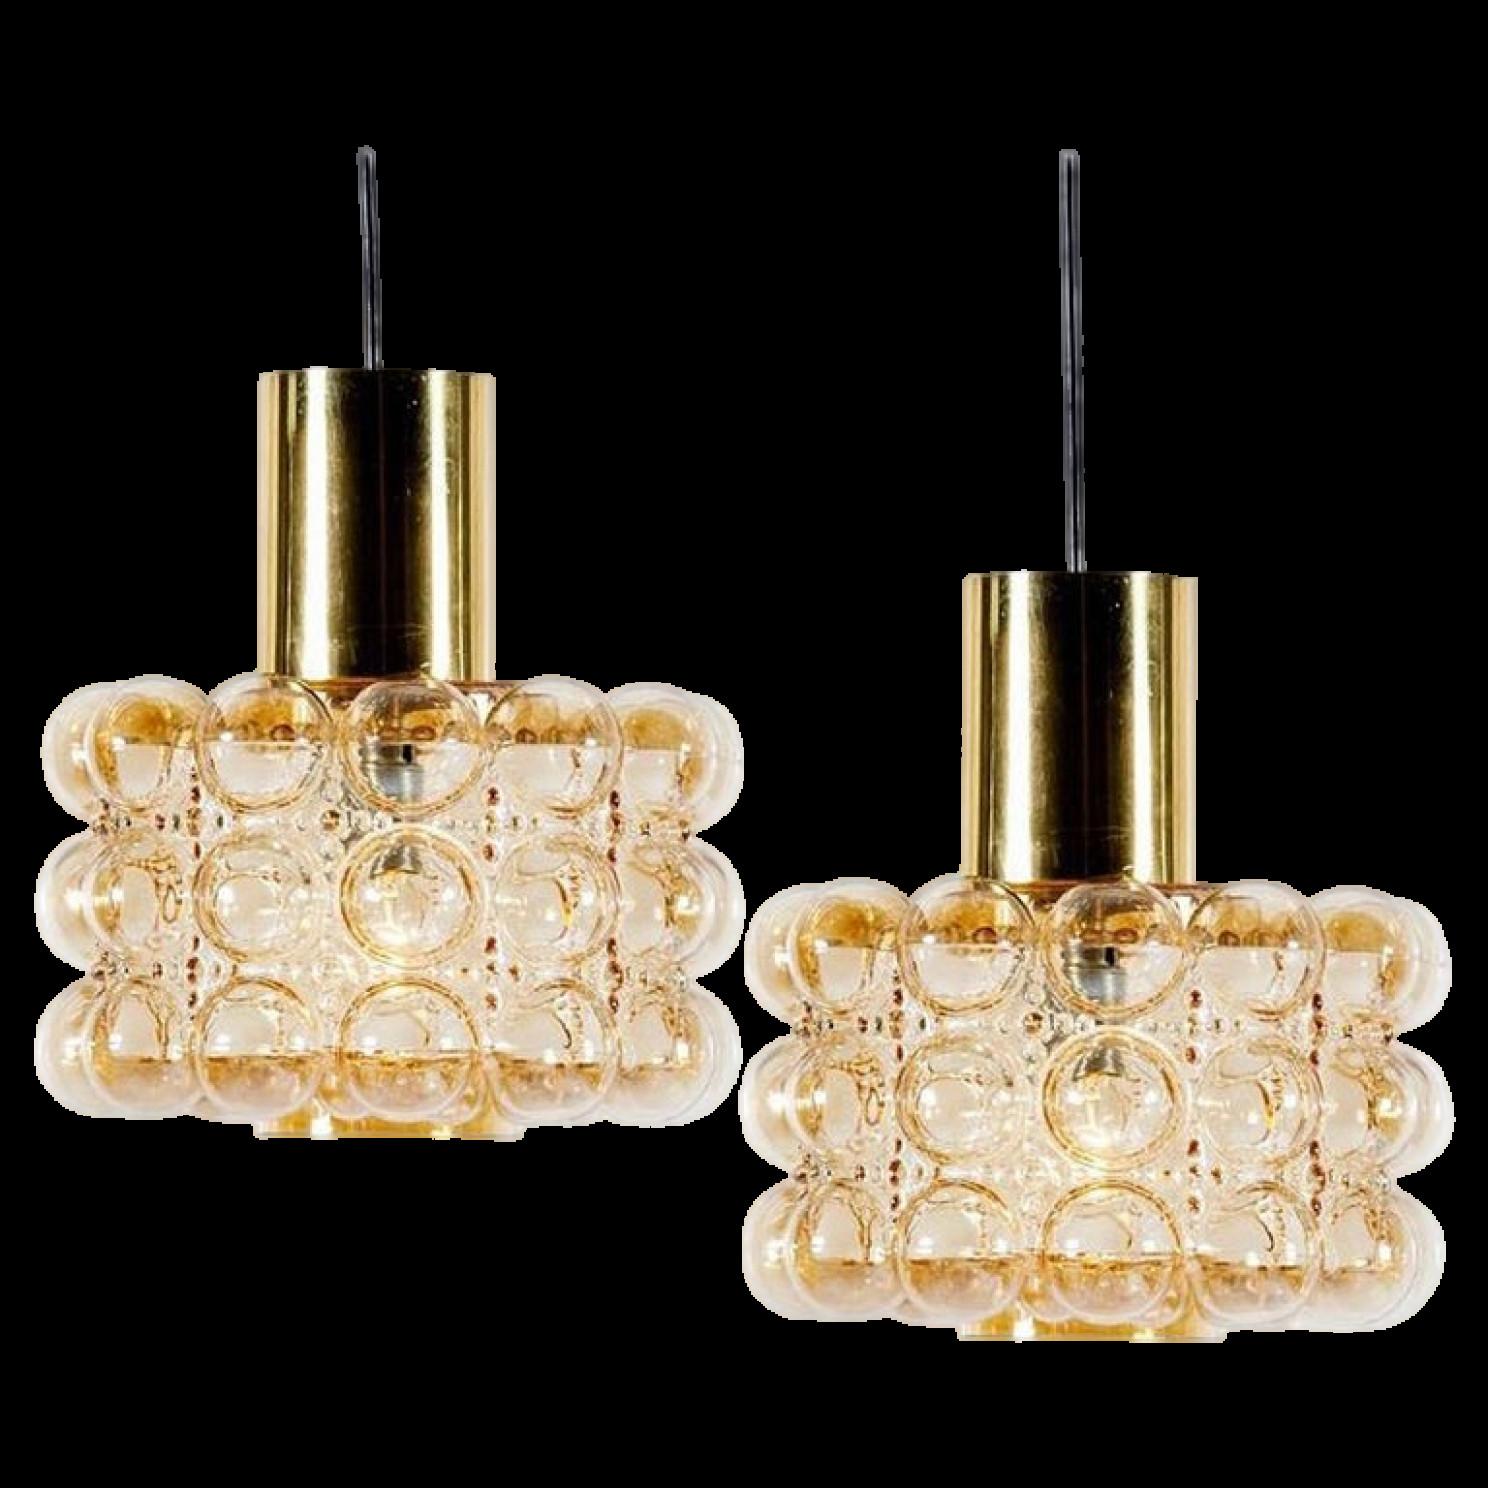 Pair of beautiful bubble glass chandeliers or pendant lights designed by Helena Tynell for Glashütte Limburg. A design Classic, the hand blown amber glass gives a wonderful warm glow.

The dimensions: Height 80 cm from ceiling, the diameter 30 cm.